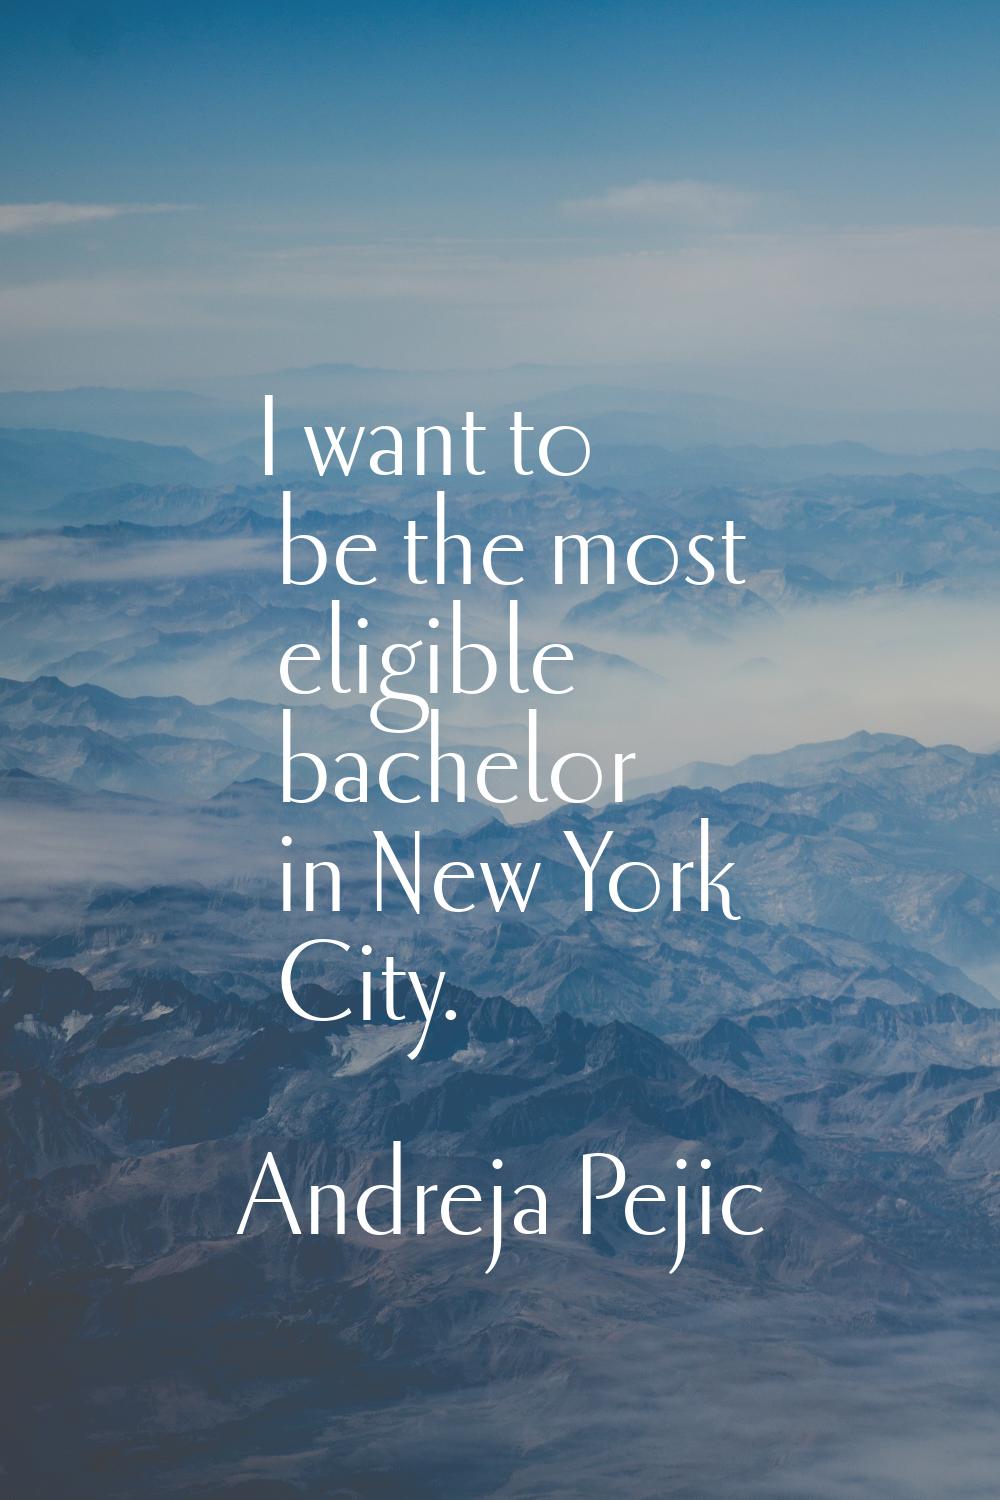 I want to be the most eligible bachelor in New York City.